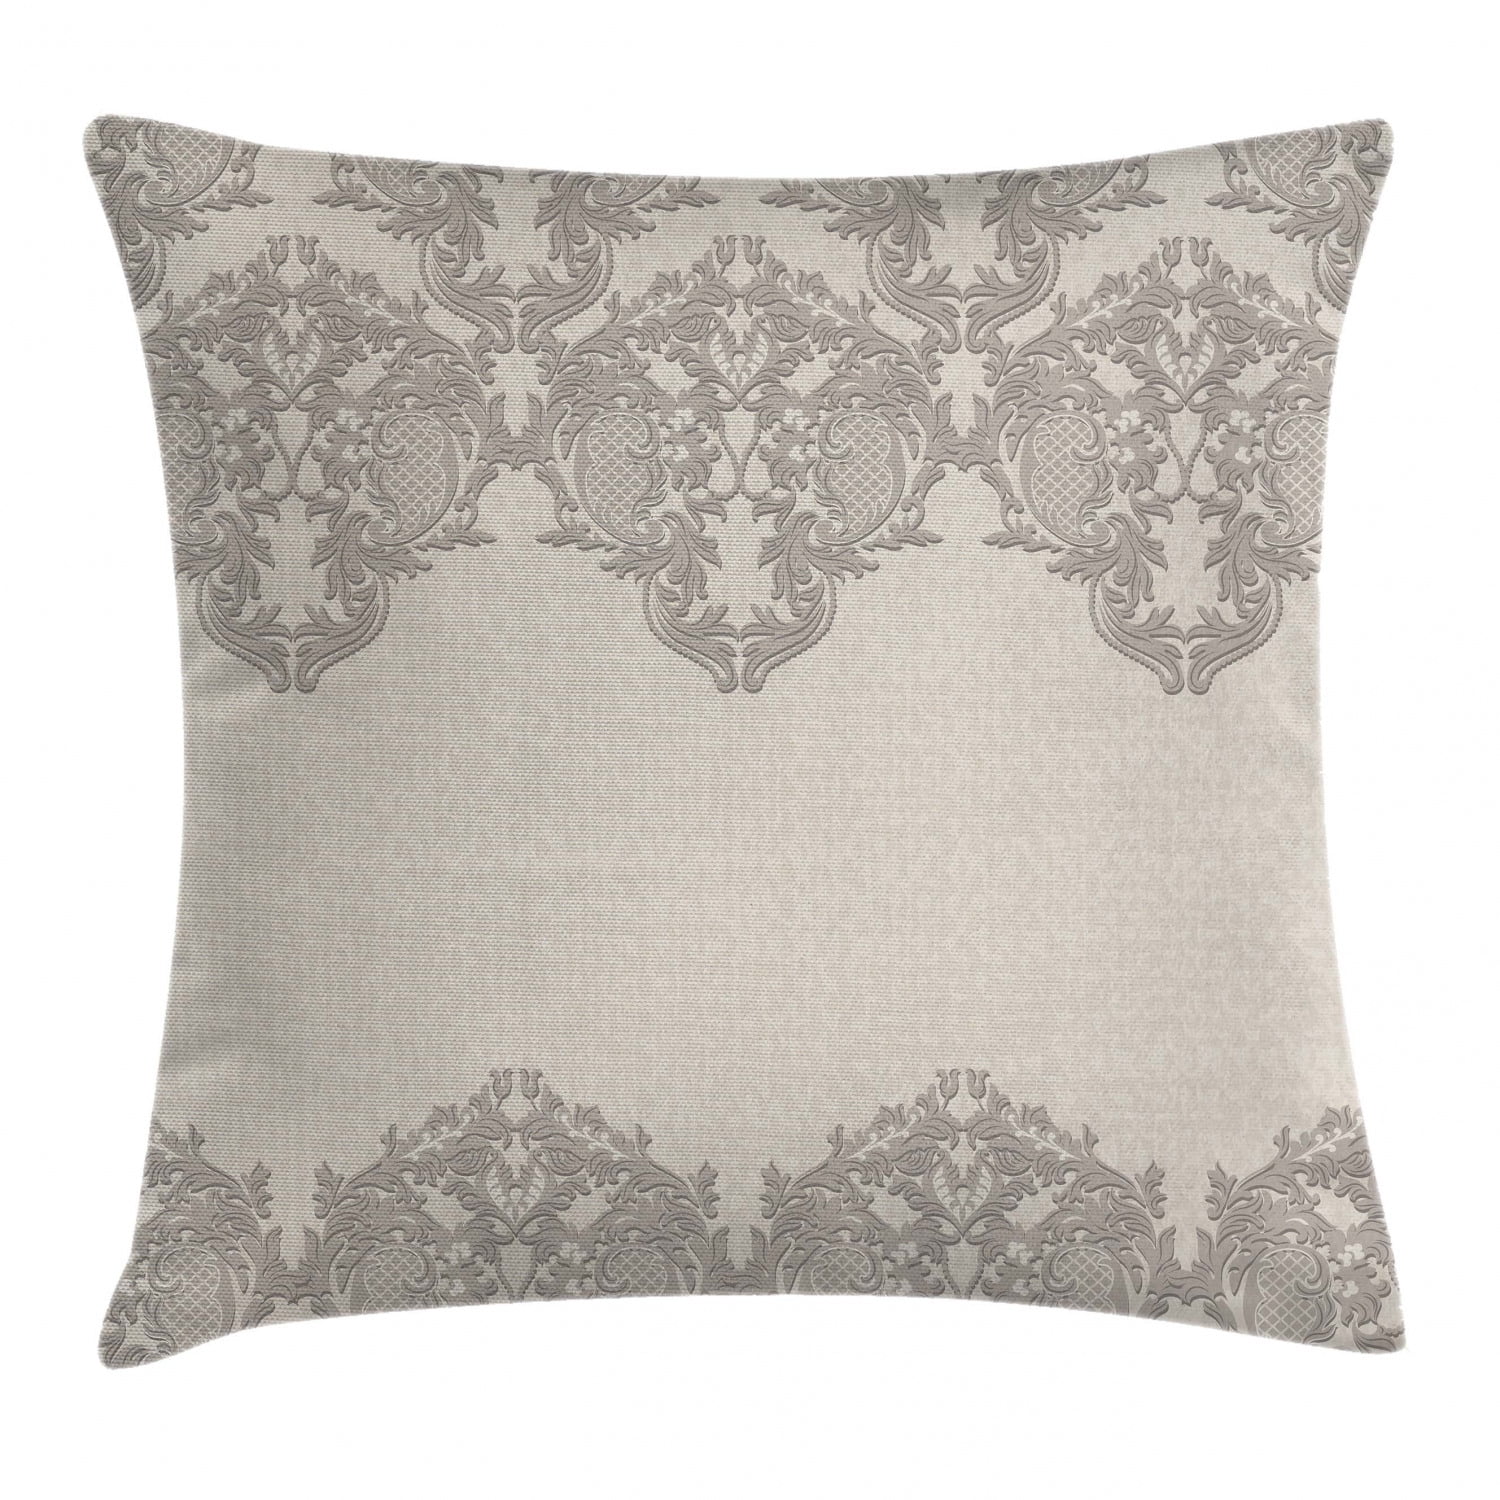 Taupe Lace Like Framework Borders with Details Delicate Intricate Retro Dated Print Ambesonne Taupe Throw Pillow Cushion Cover Decorative Square Accent Pillow Case 16 X 16 